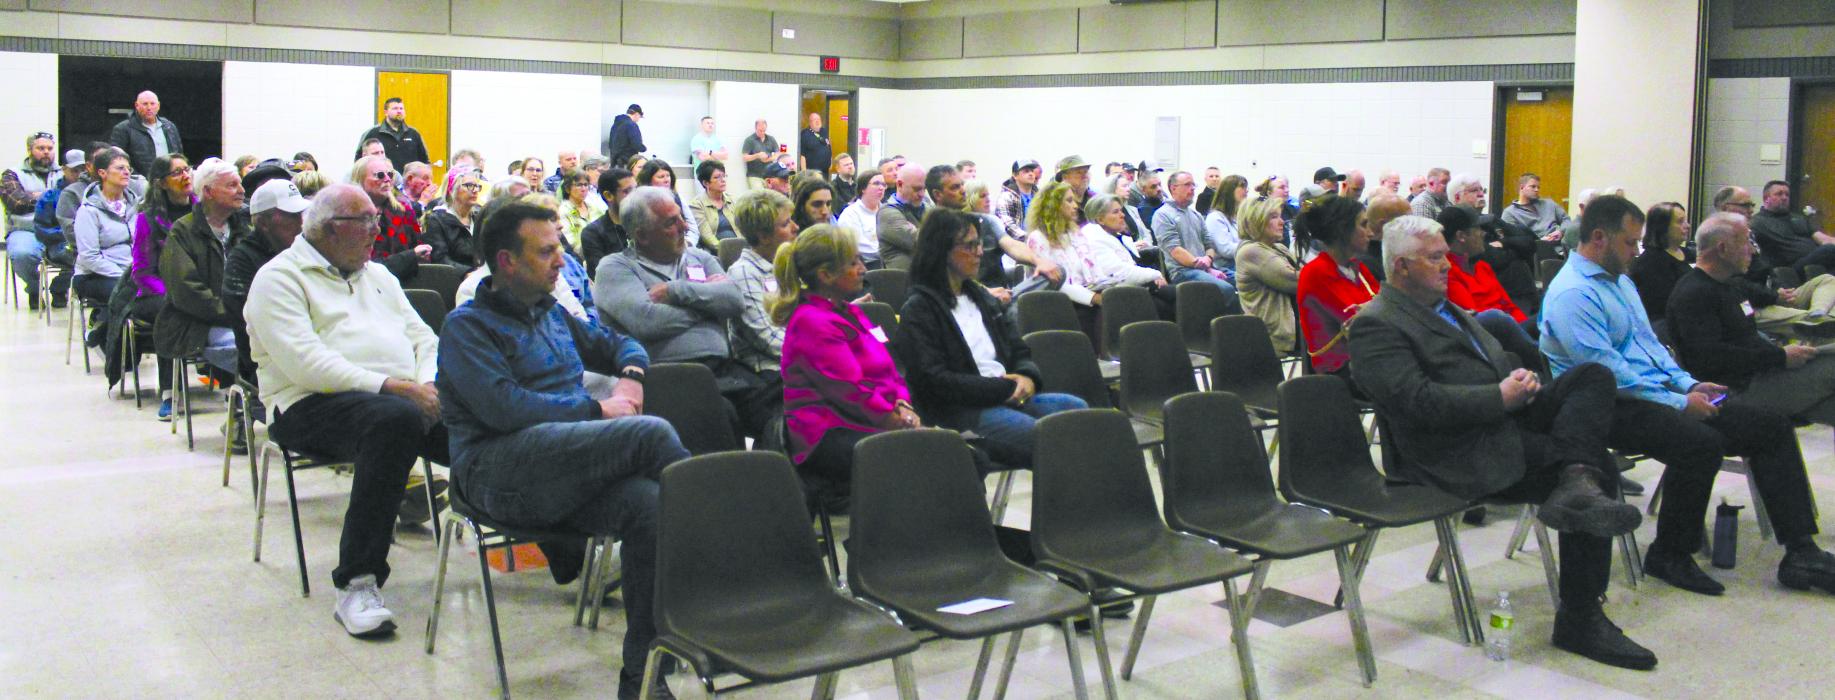 People filled the room at the North Sioux City Community Center Feb. 29 for a town hall meeting on the Union Crossing Development. The meeting was over two hours long and had many speakers along with a question and answer period at the end of the meeting. Photo by Beth Hutcheson • times1reporter@gmail.com